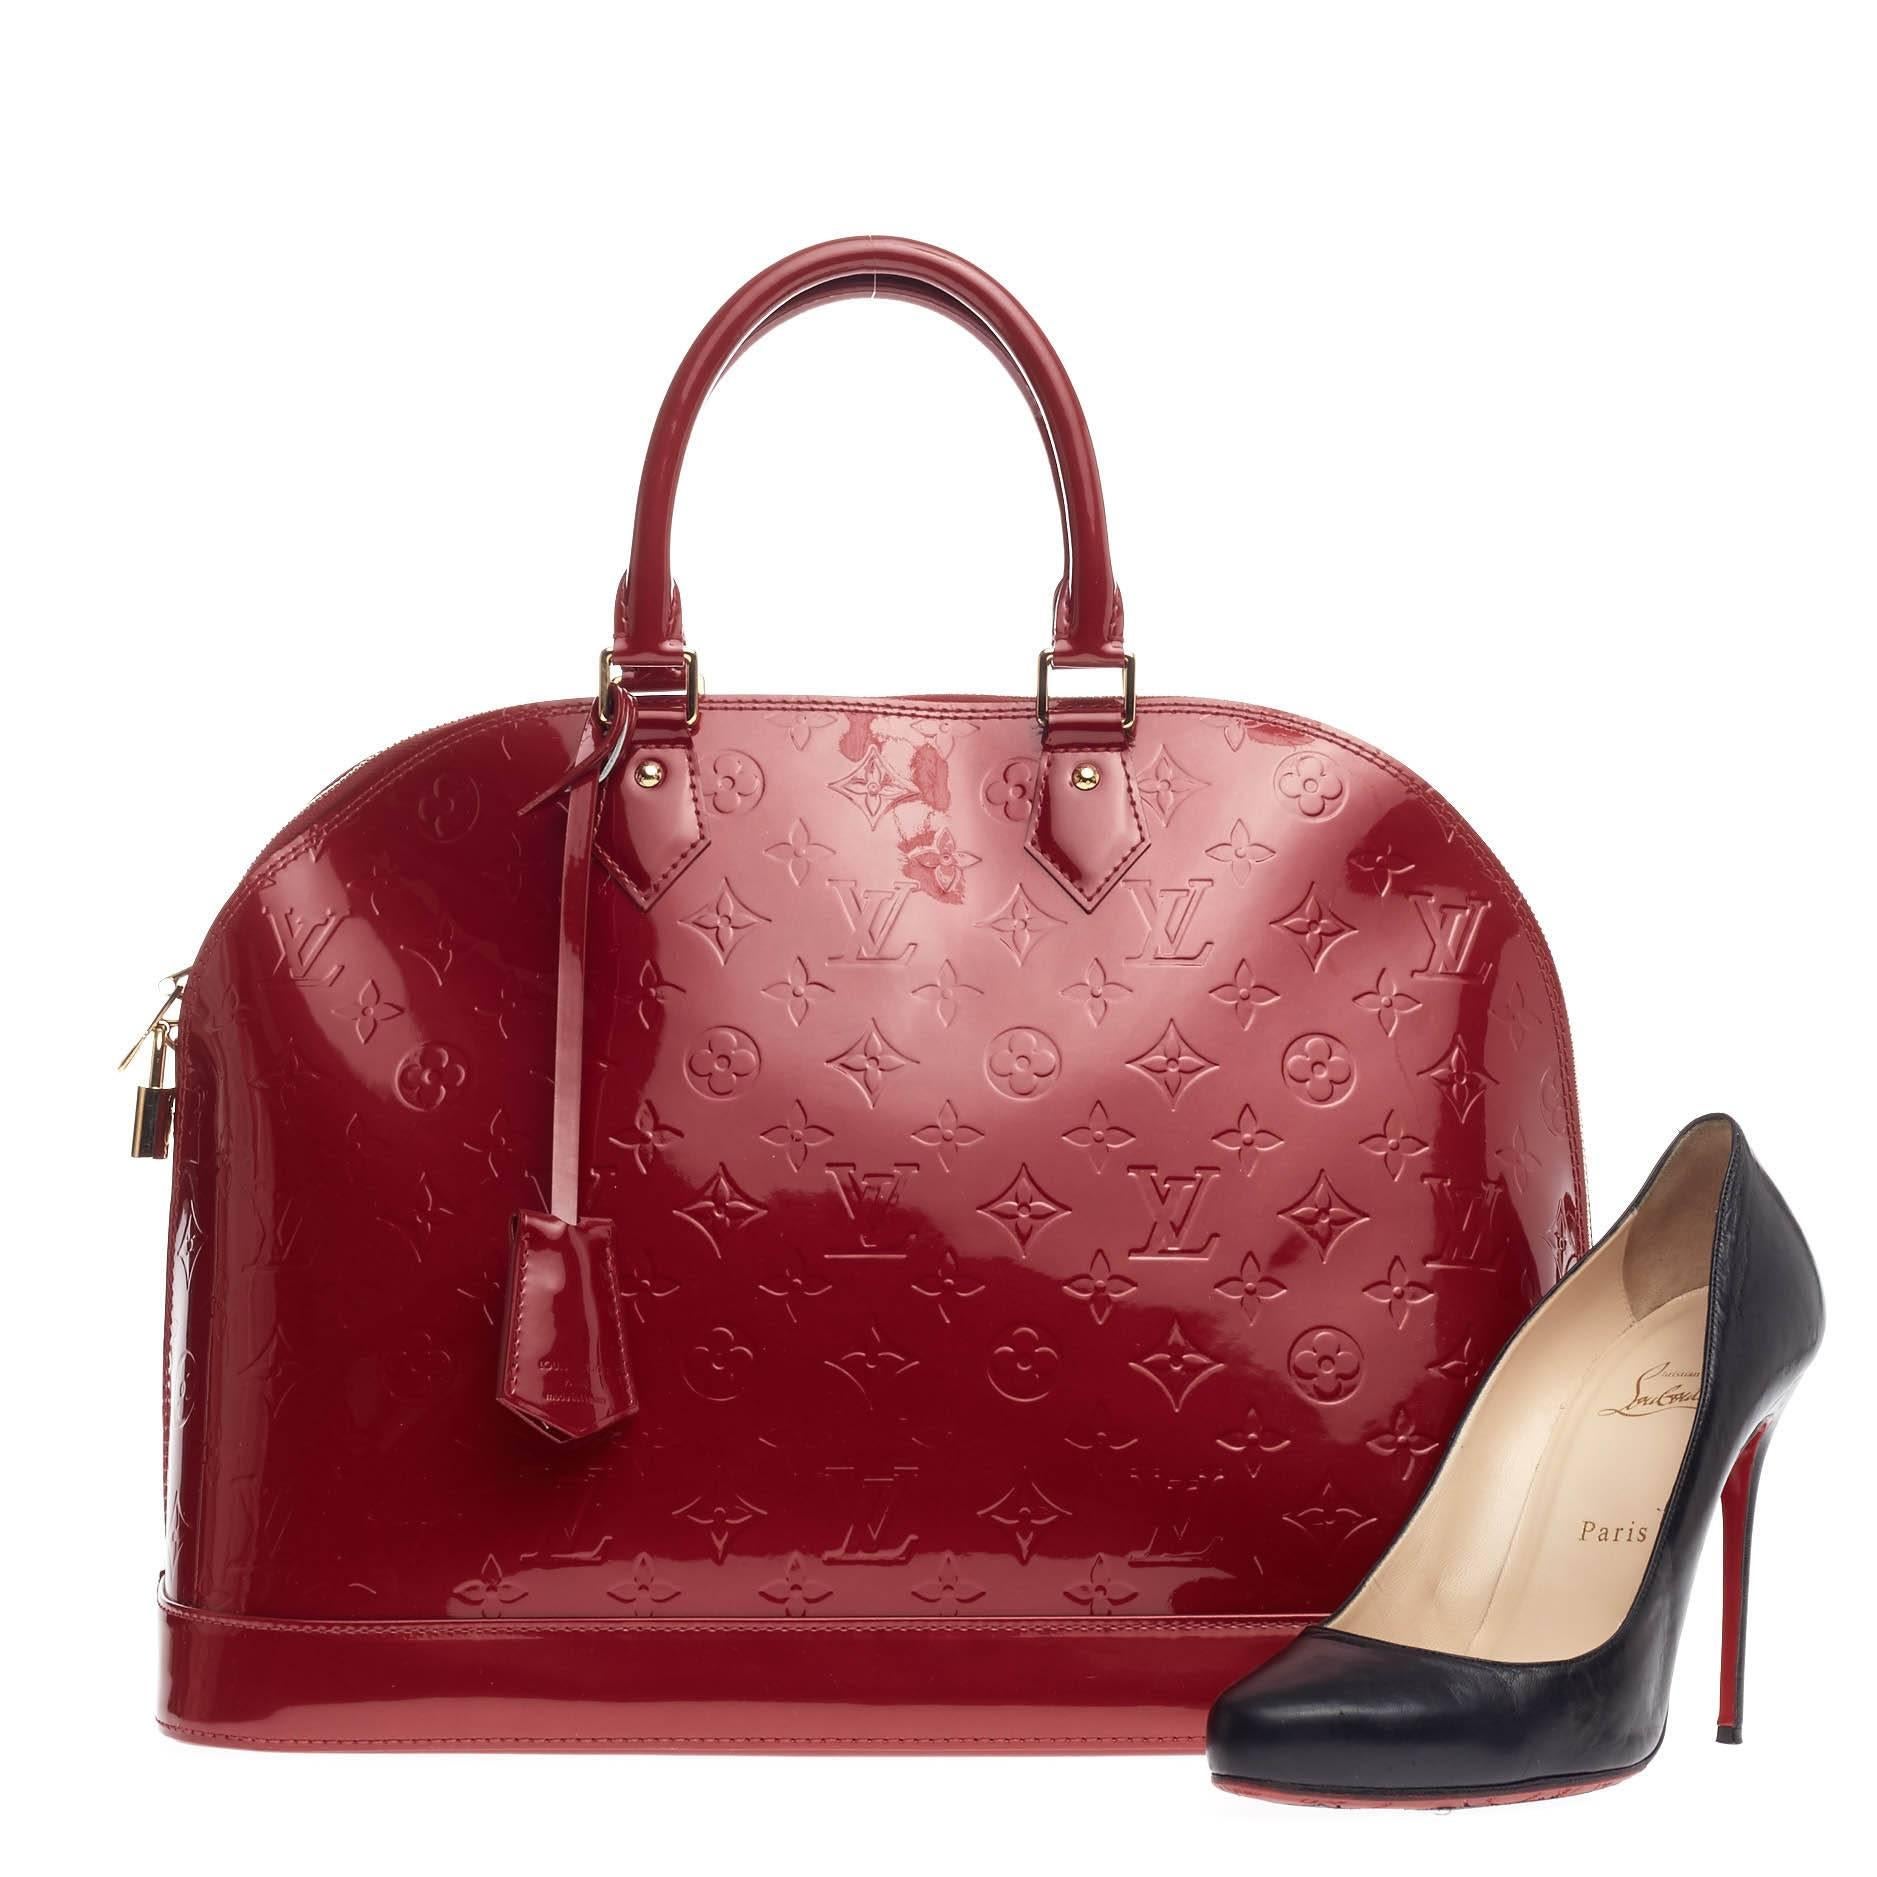 This authentic Louis Vuitton Alma Monogram Vernis GM is a fresh and elegant spin on a classic style that is perfect for all seasons. Crafted from Louis Vuitton's pomme d’amour red monogram vernis, this dome-shaped satchel features double rolled